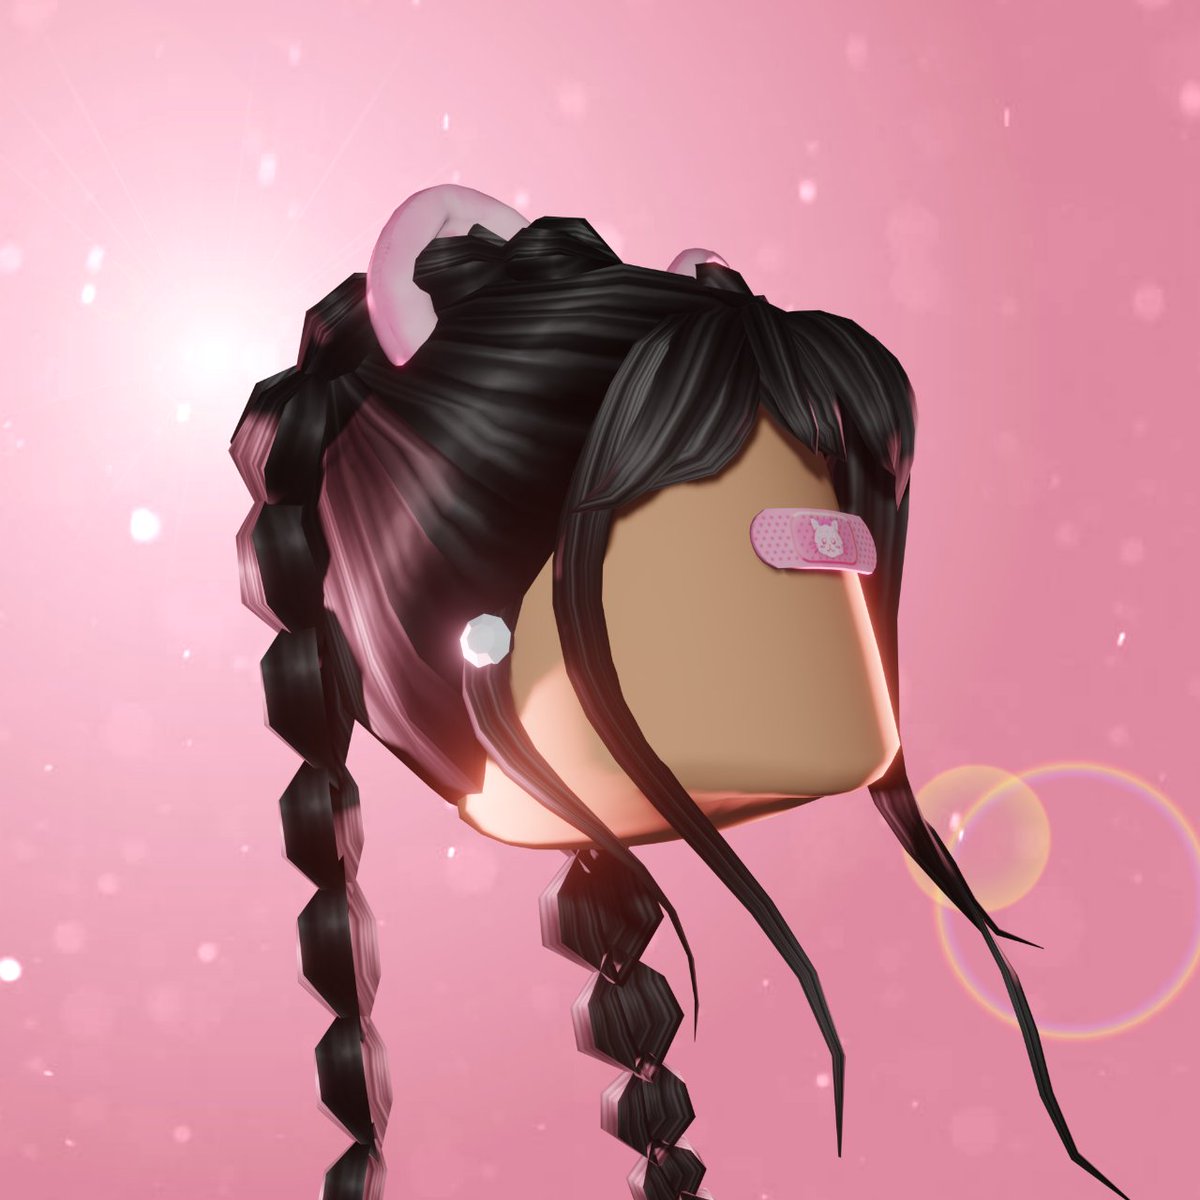 Fsi3n On Twitter A Head Profile Picture Gfx For Jennyb F Roblox Name Note For The Next 10 People Who Buy A Roblox Head Profile Picture Gfx Is 1 1 Pic Gift Dm Me - head roblox profile pictures